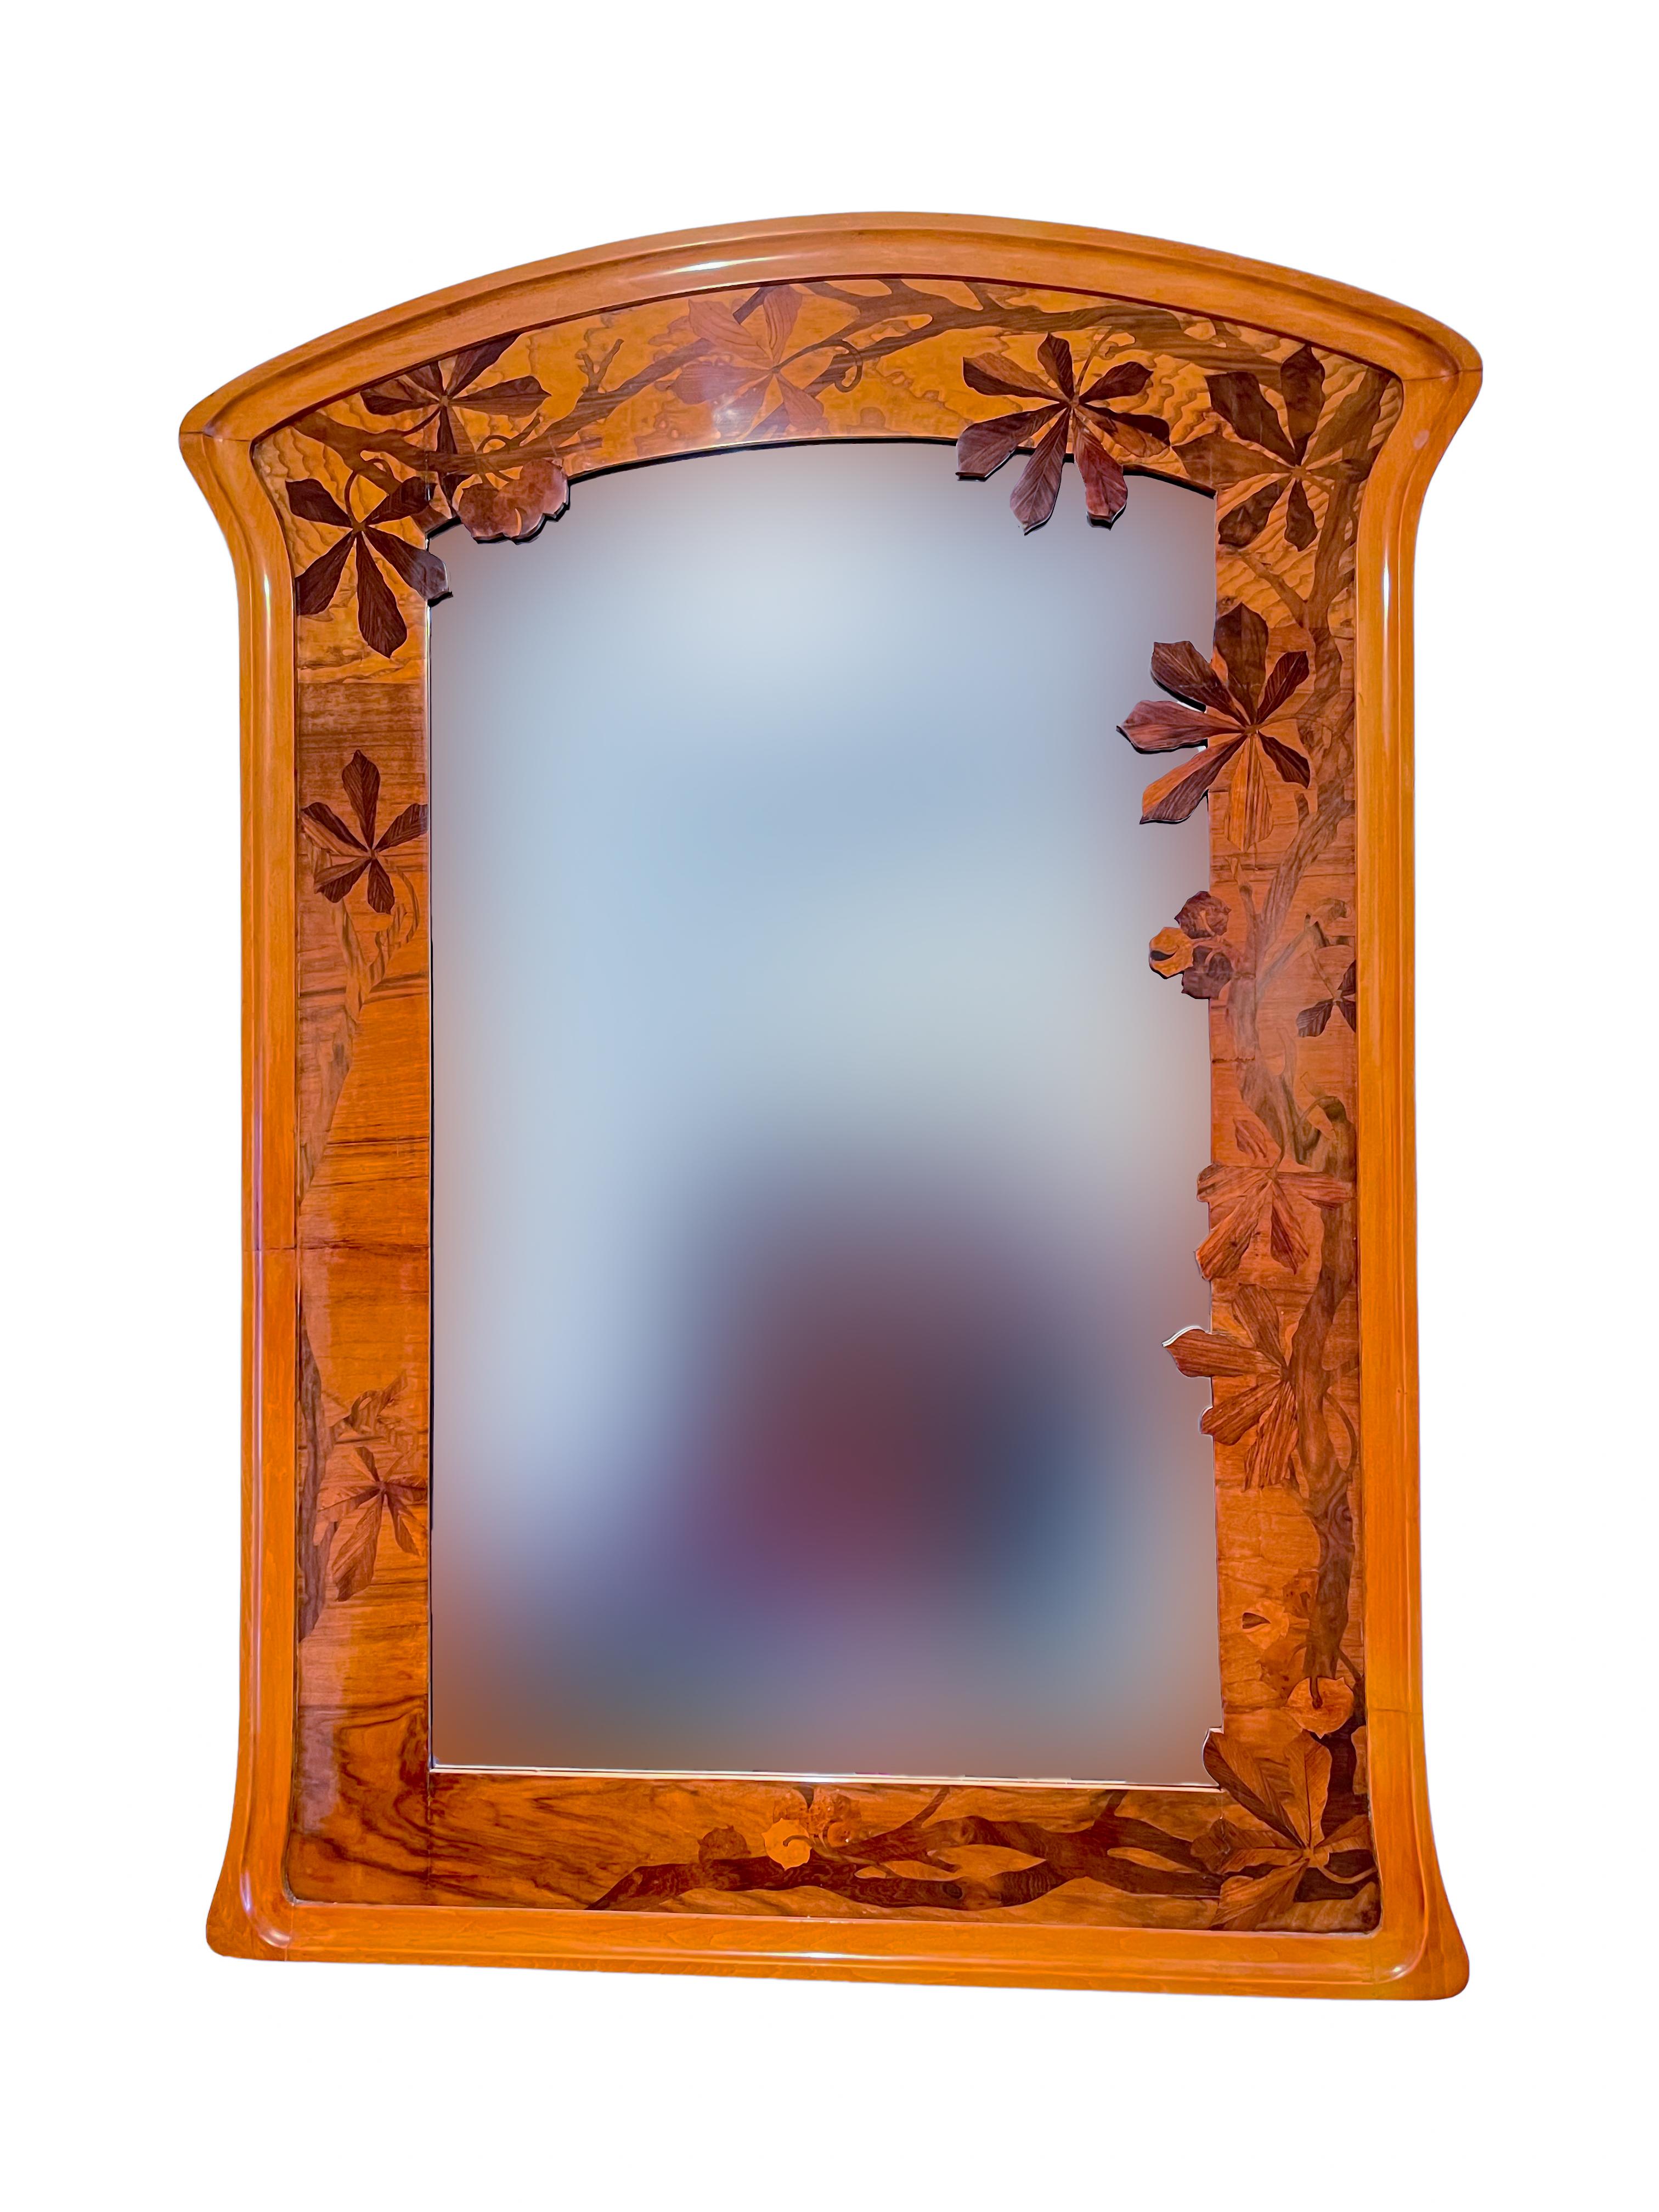 An impressive early 20th century French Art Nouveau marquetry and carved wood wall mirror by, Louis Majorelle with various wood inlay marquetry decoration of maple leafs throughout all inlaid into a solid carved wood frame with its beveled glass